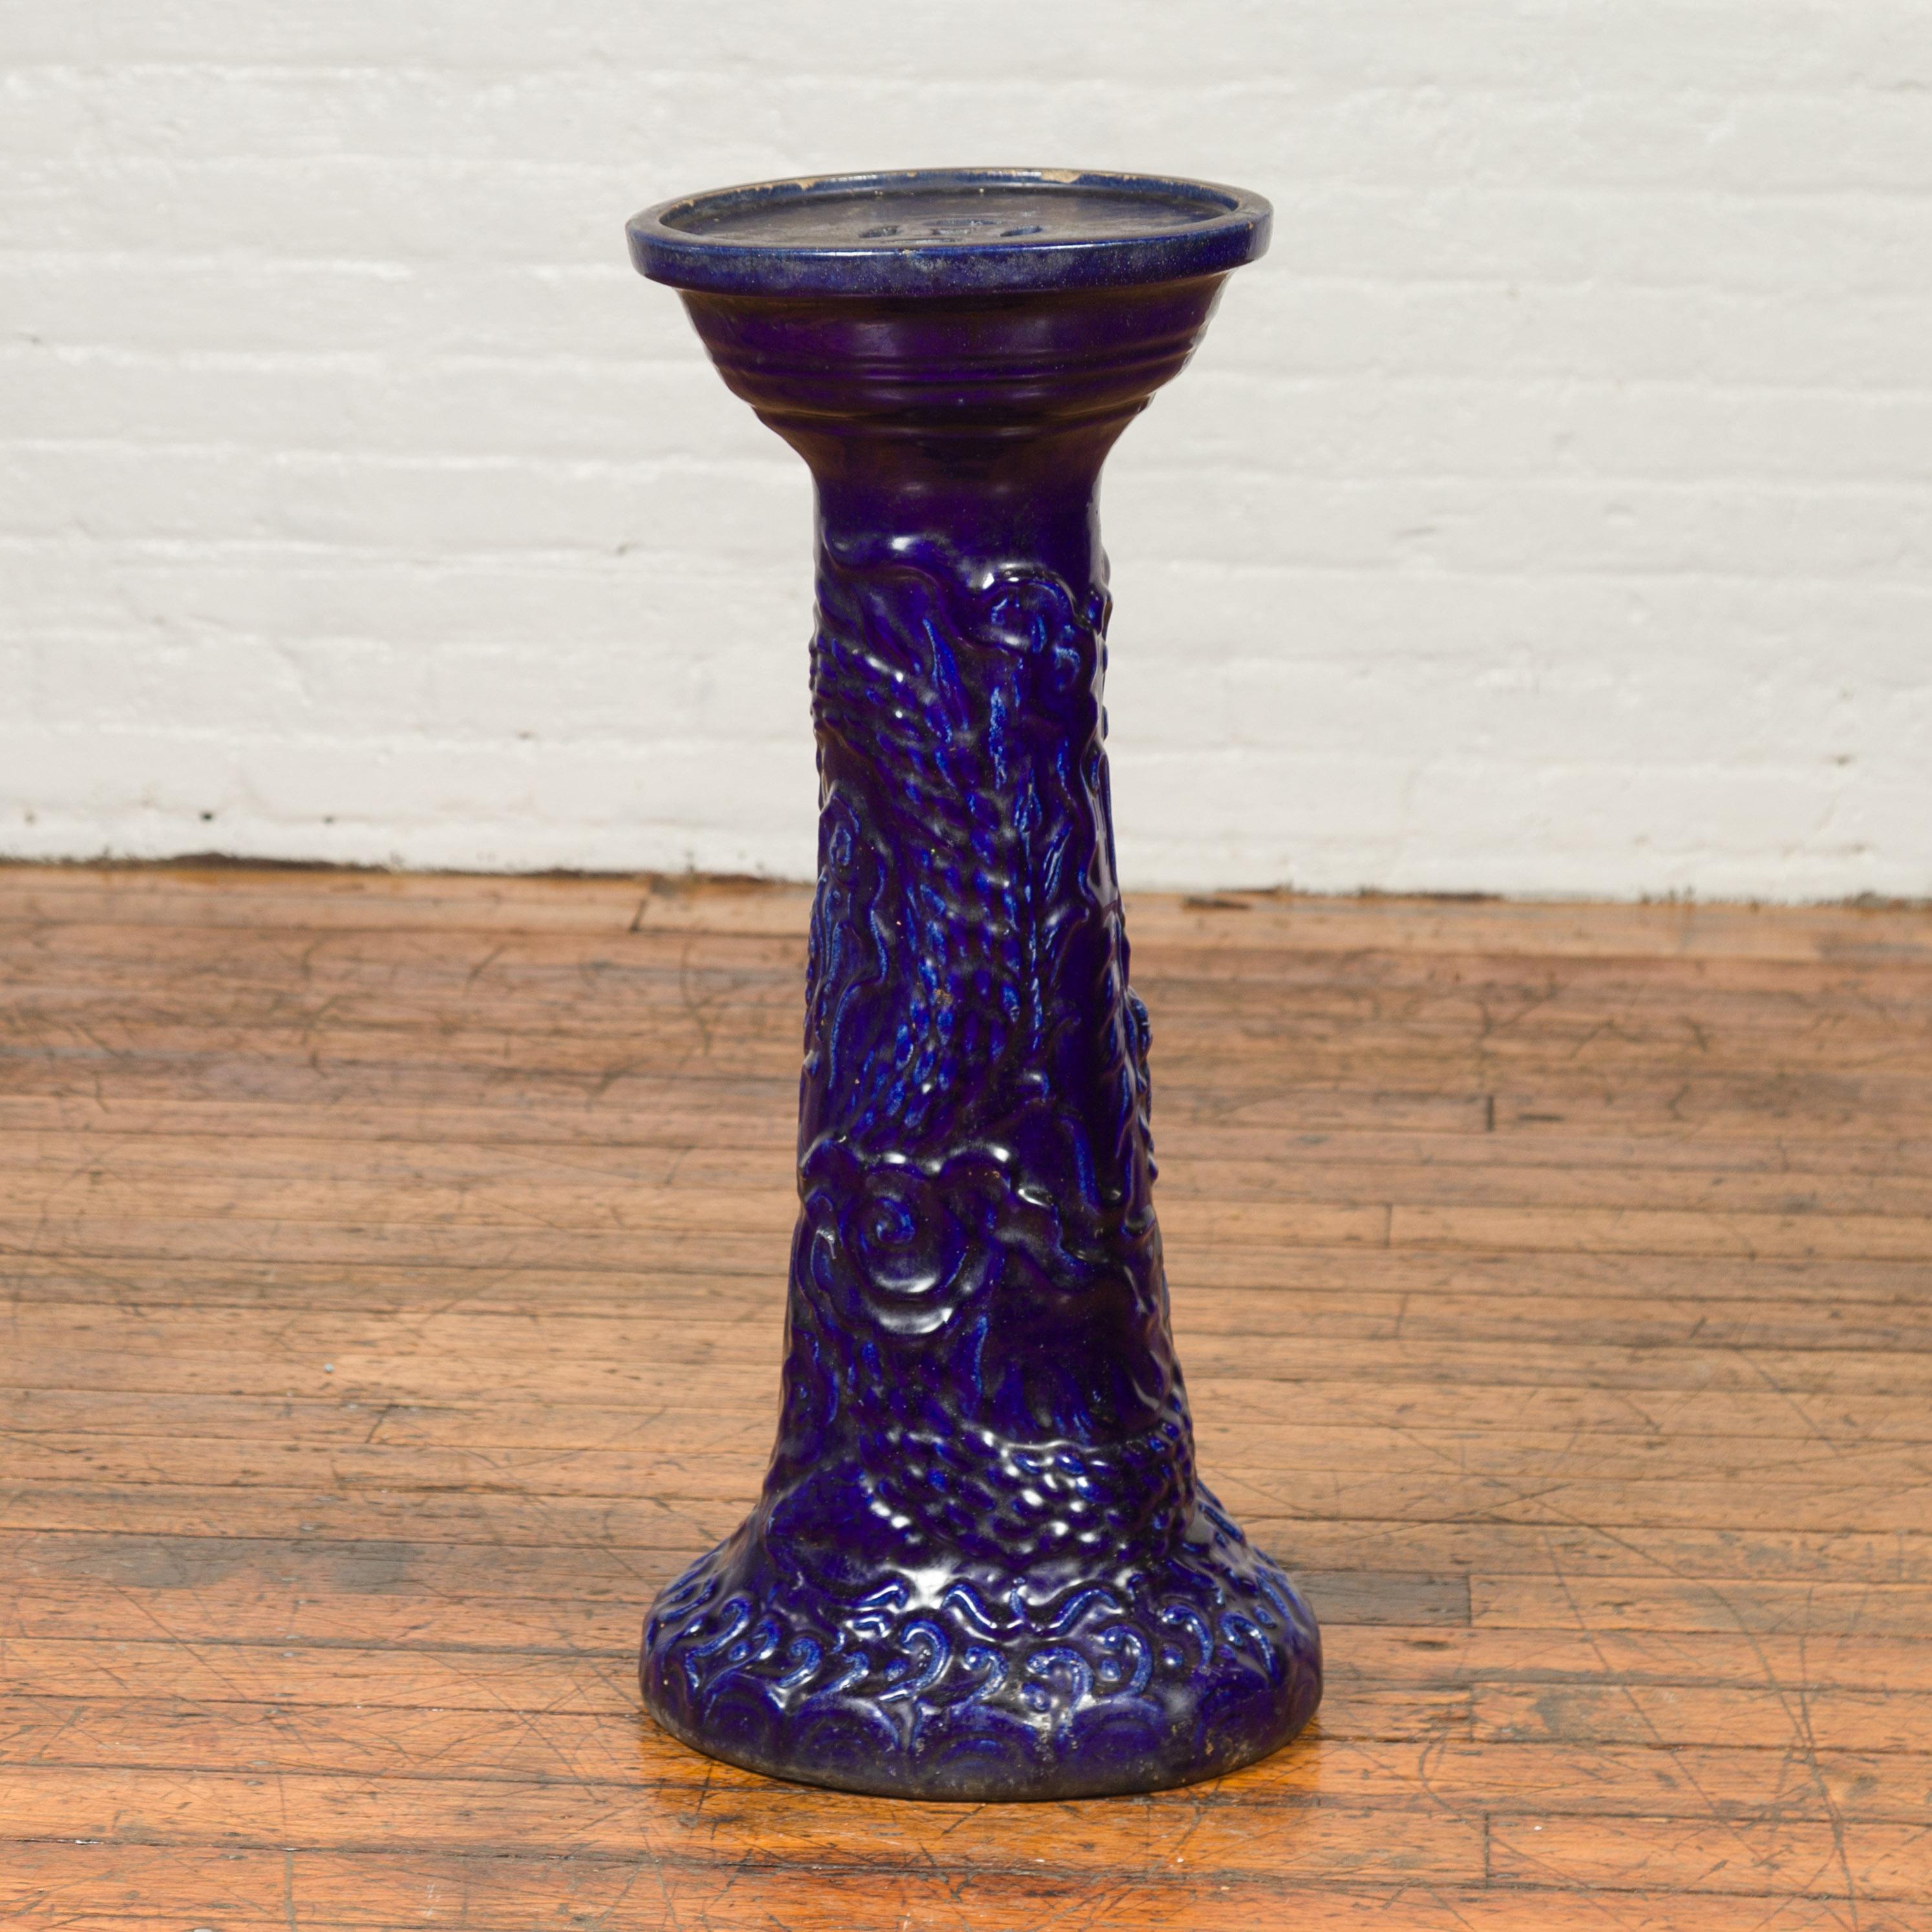 A Chinese antique dark blue glazed artisan pedestal stand with scrolling effects. Boasting a lovely dark blue glazed patina, this plant stand features a circular top pierced with small geometric openings, resting above a pedestal discreetly accented